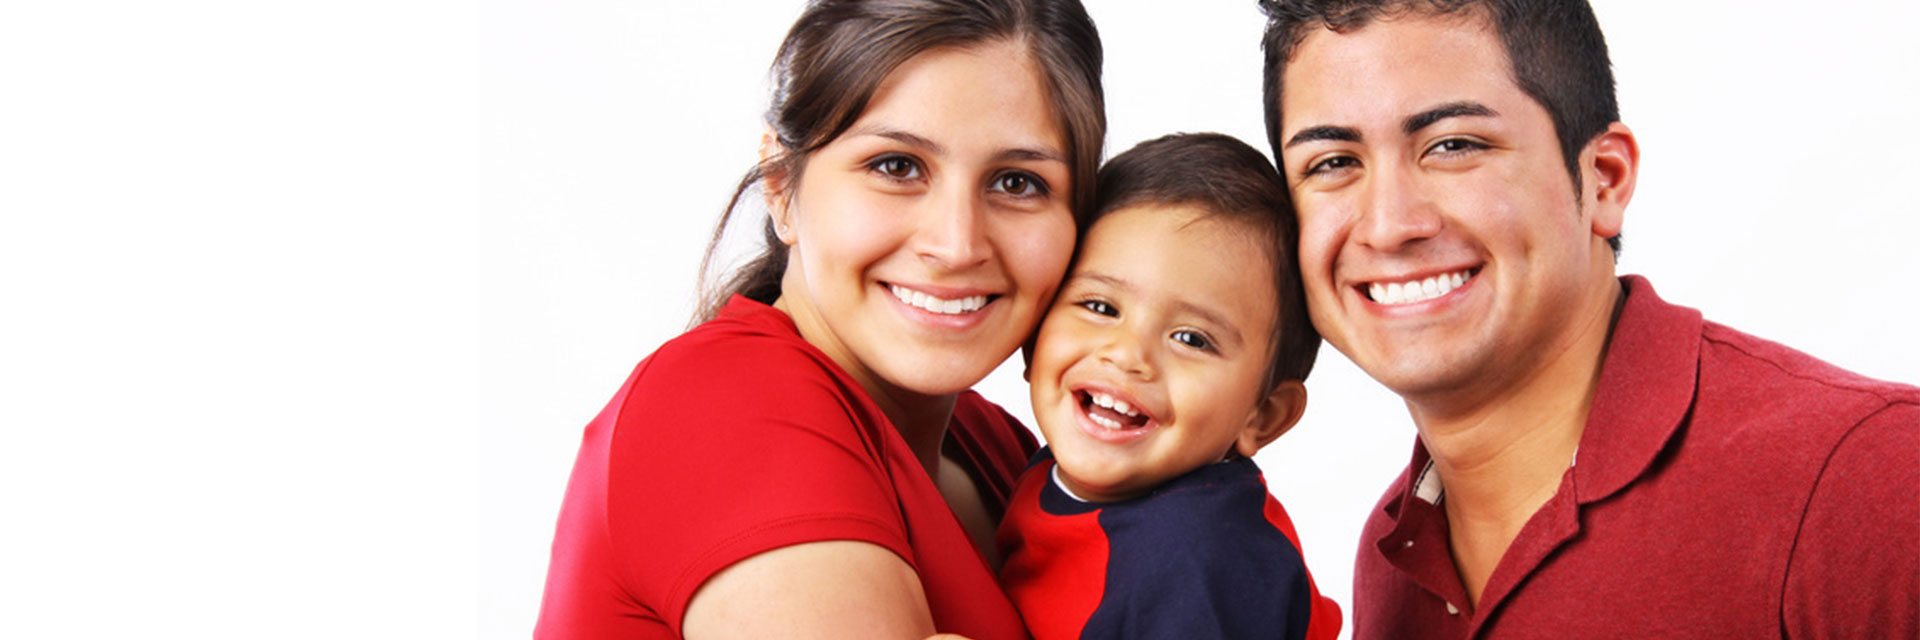 banner happy family with baby smiling discover dental